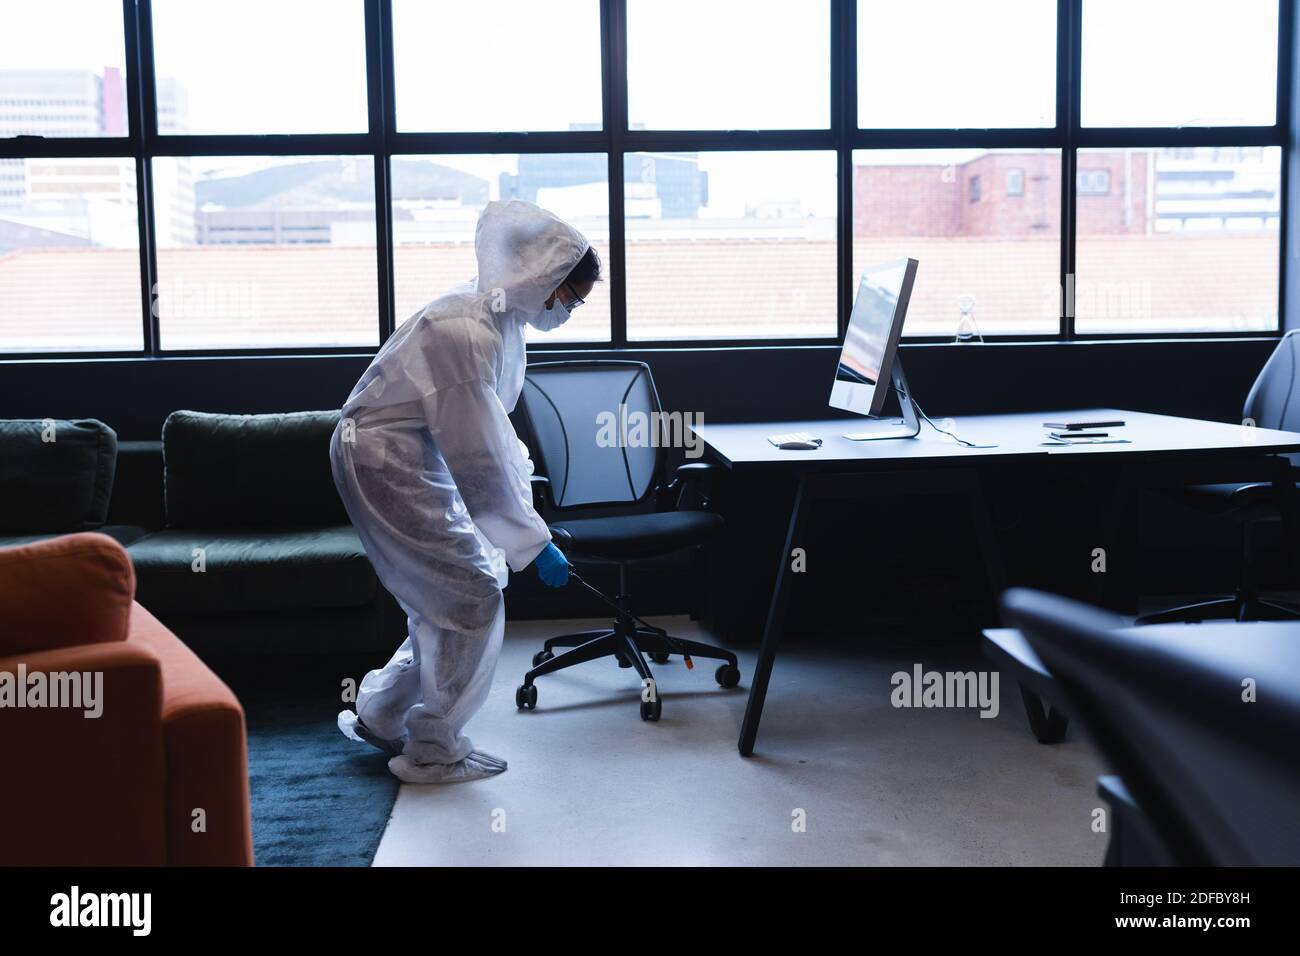 Health worker in protective clothing spraying disinfectant in office Stock Photo